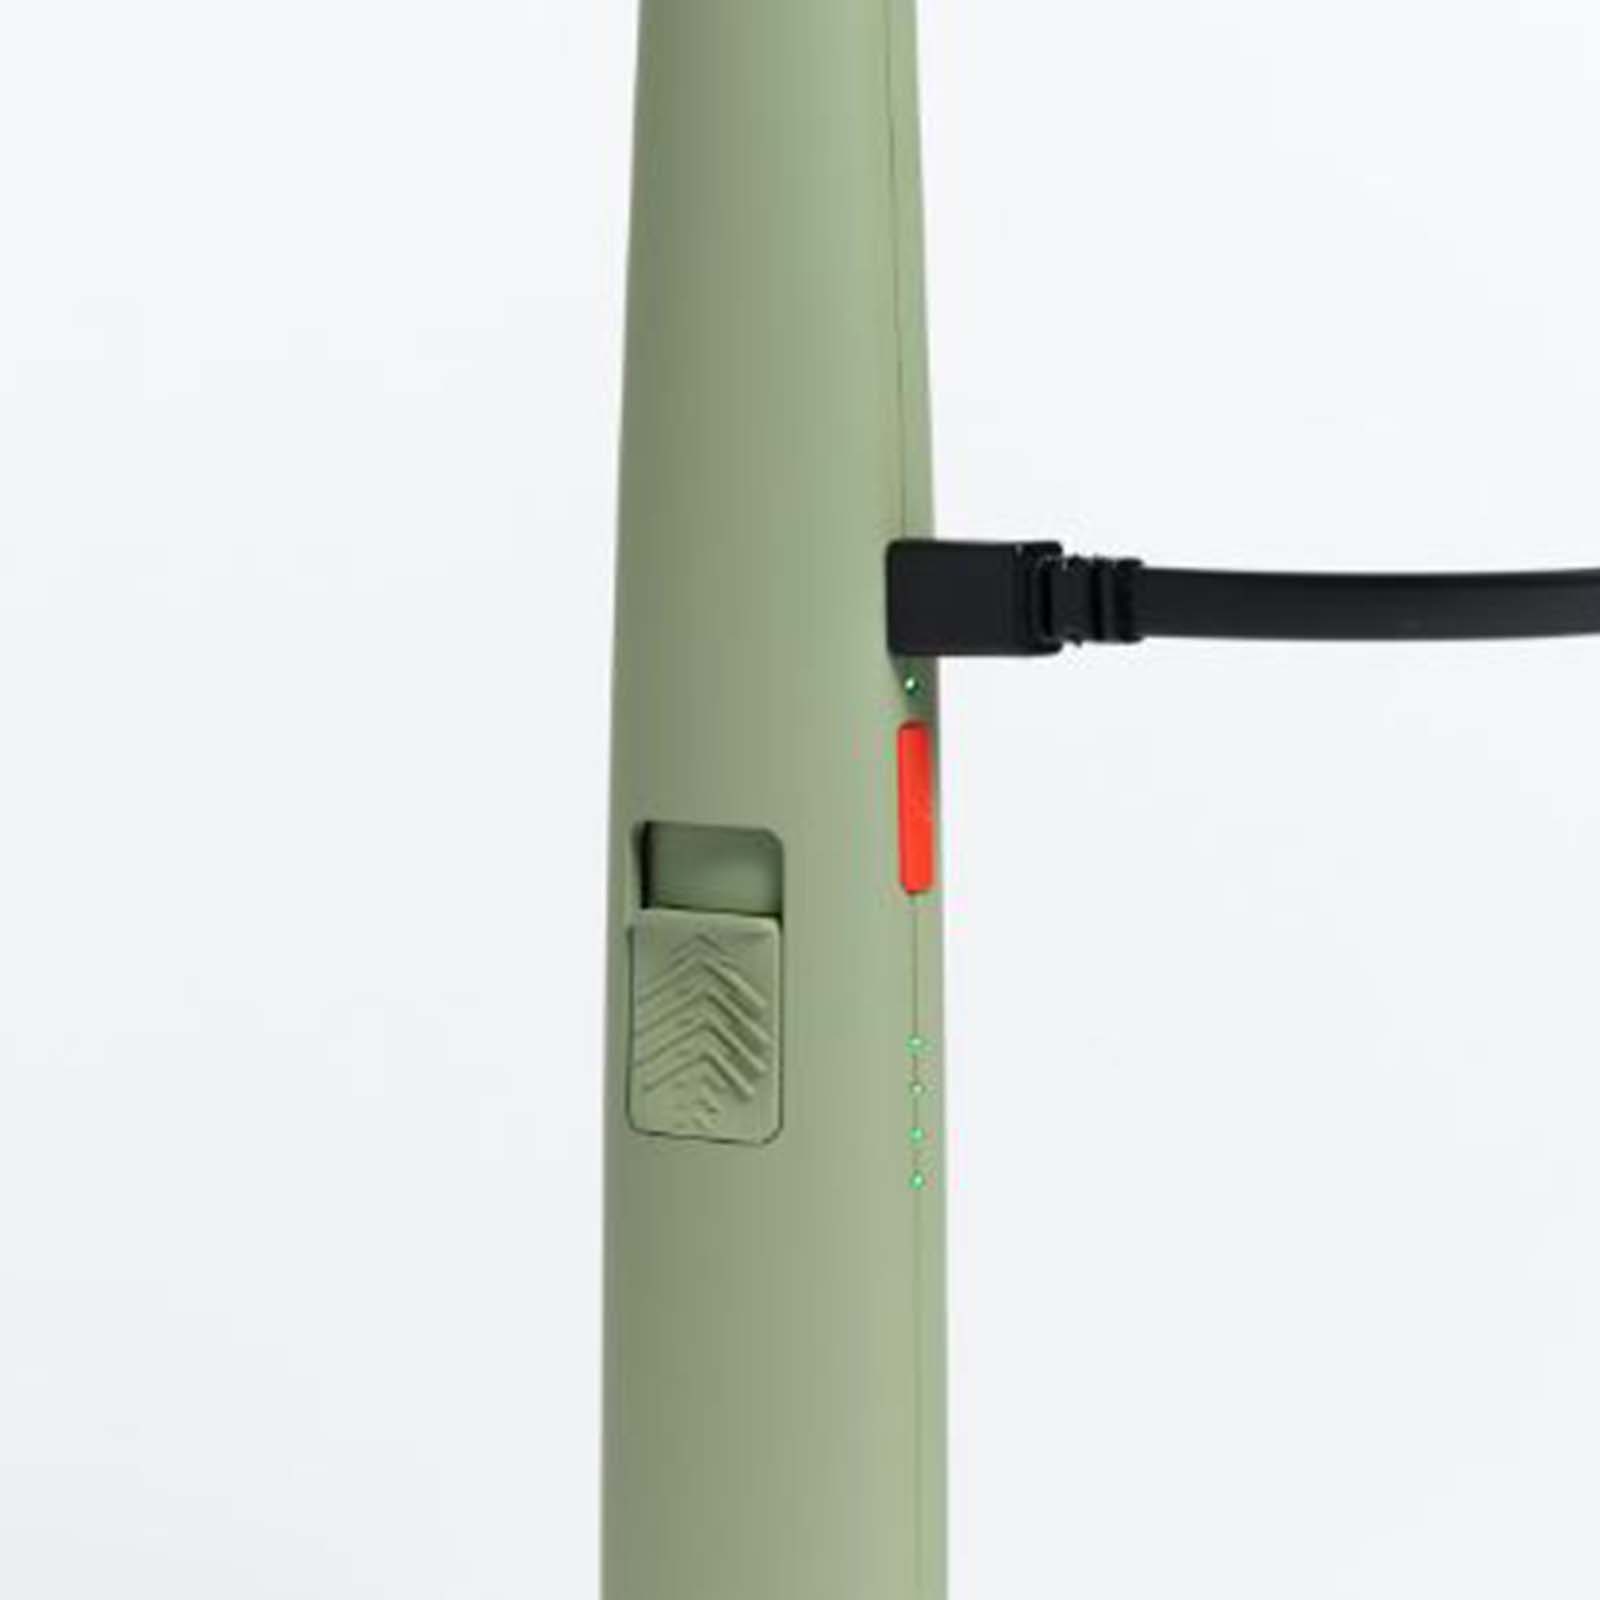 Rechargeable Lighter - Olive Green